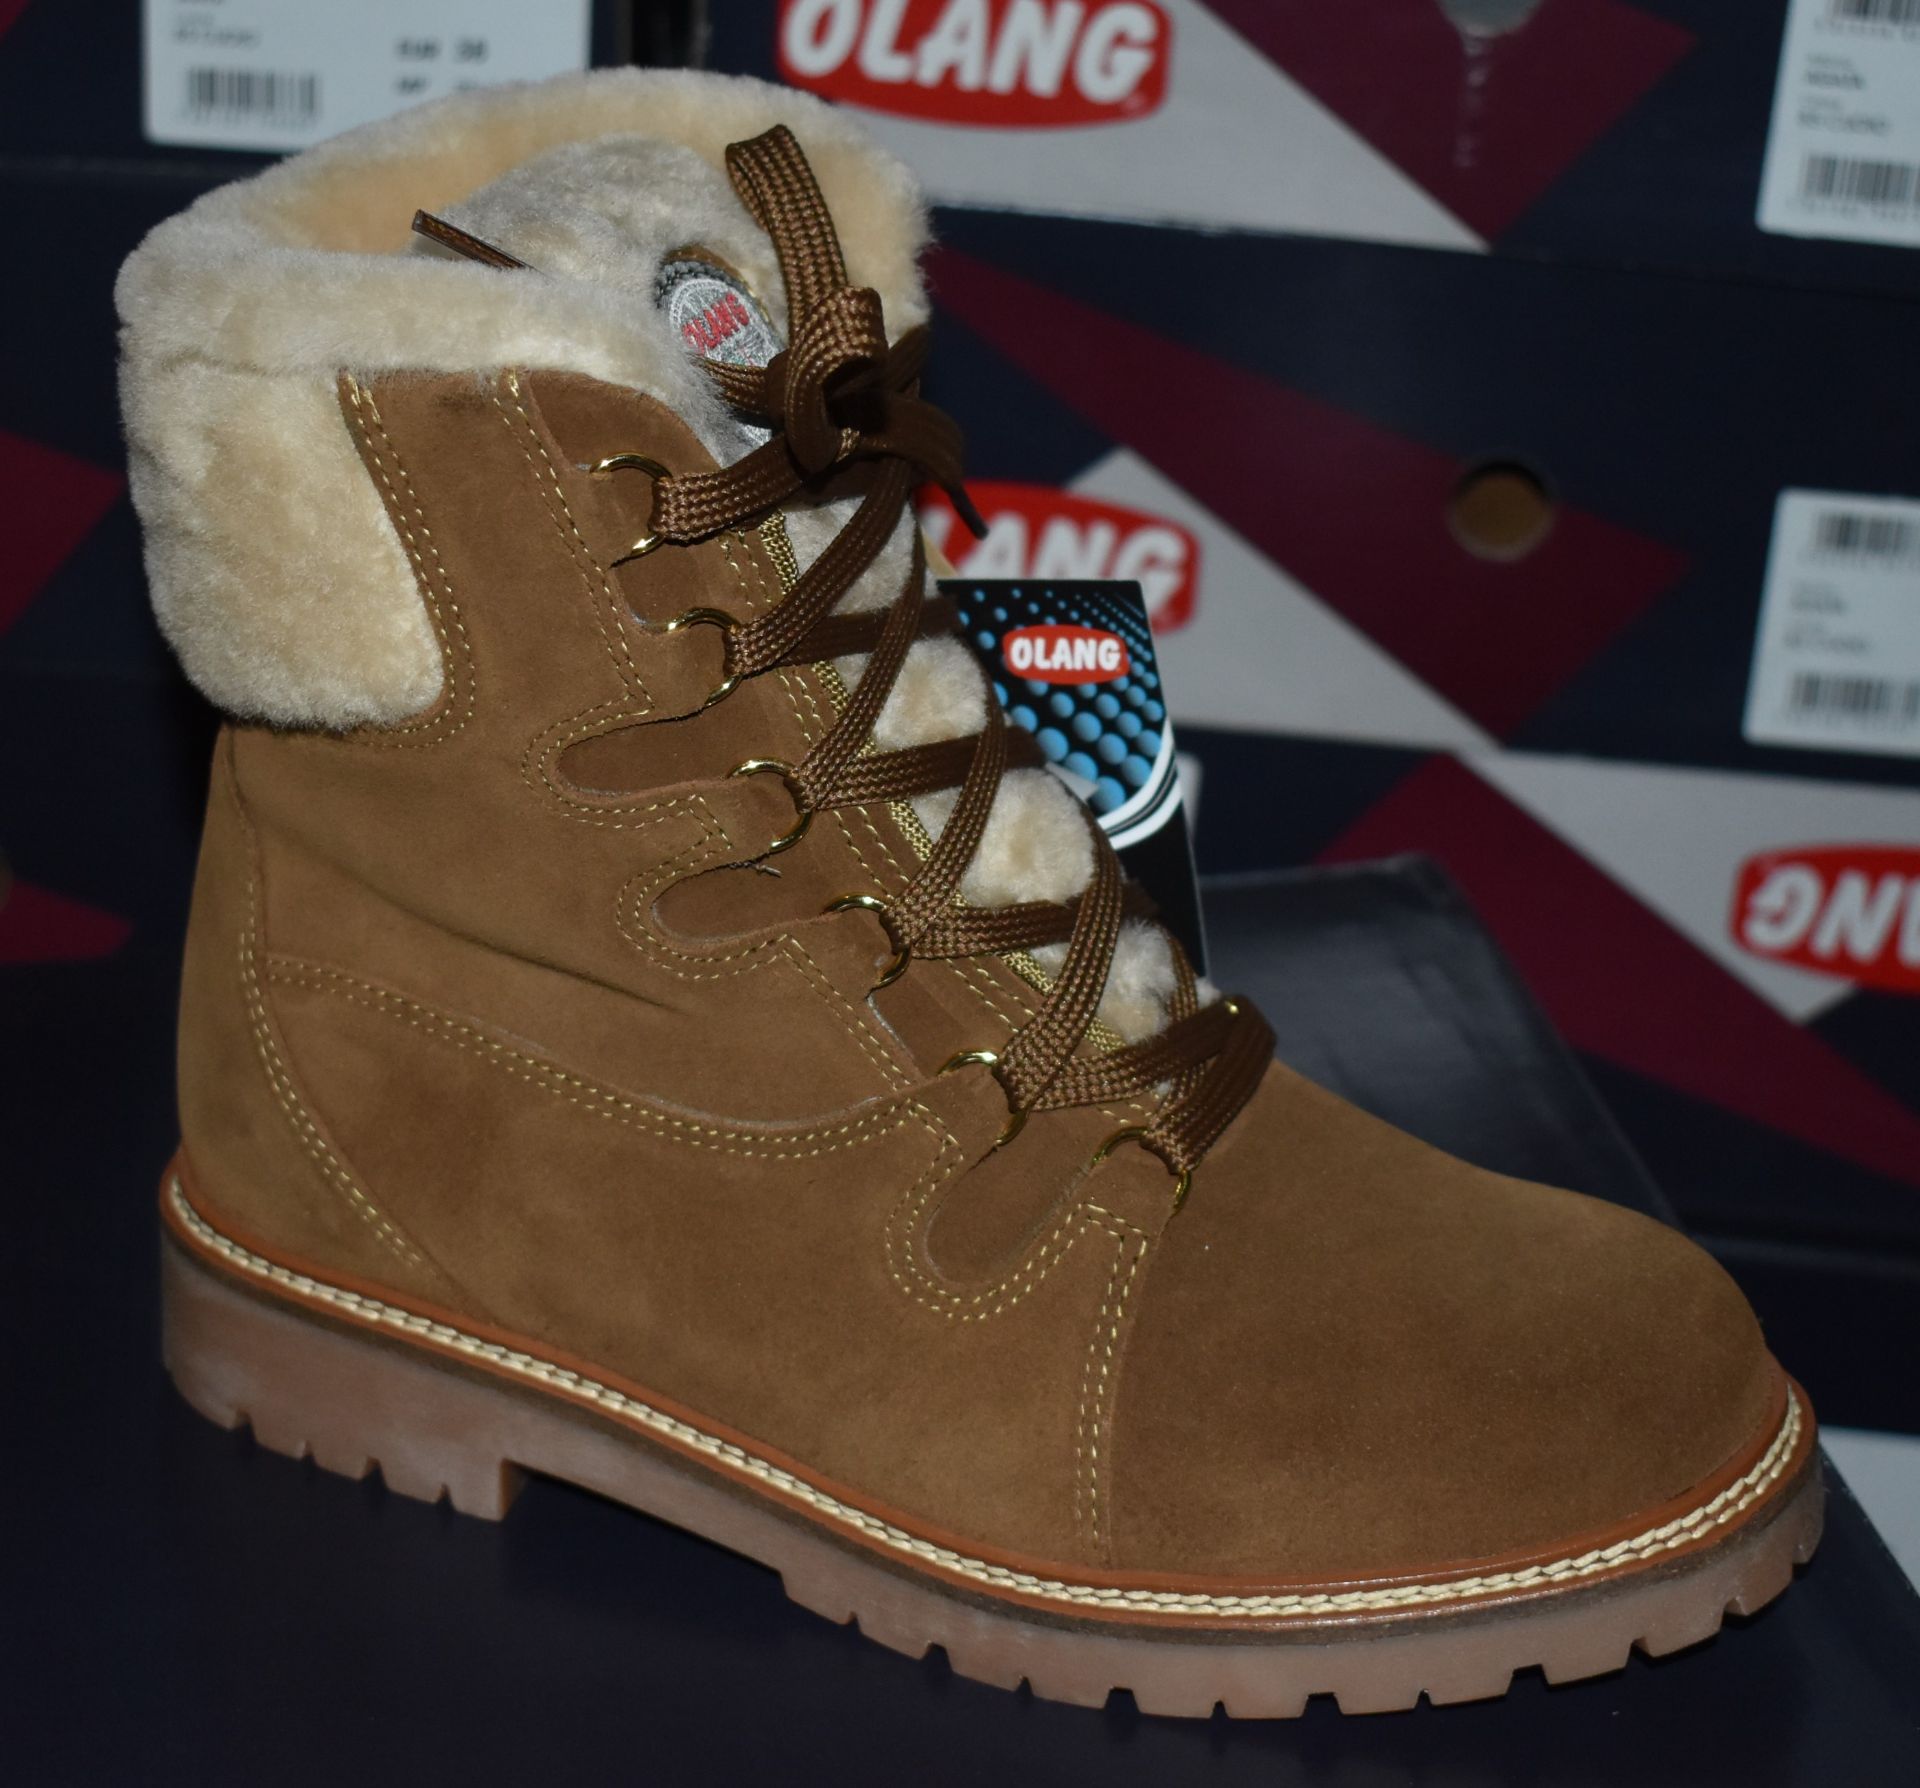 1 x Pair of Designer Olang Meribel 85 CUOIO Women's Winter Boots - Euro Size 39 - Brand New Boxed - Image 6 of 8